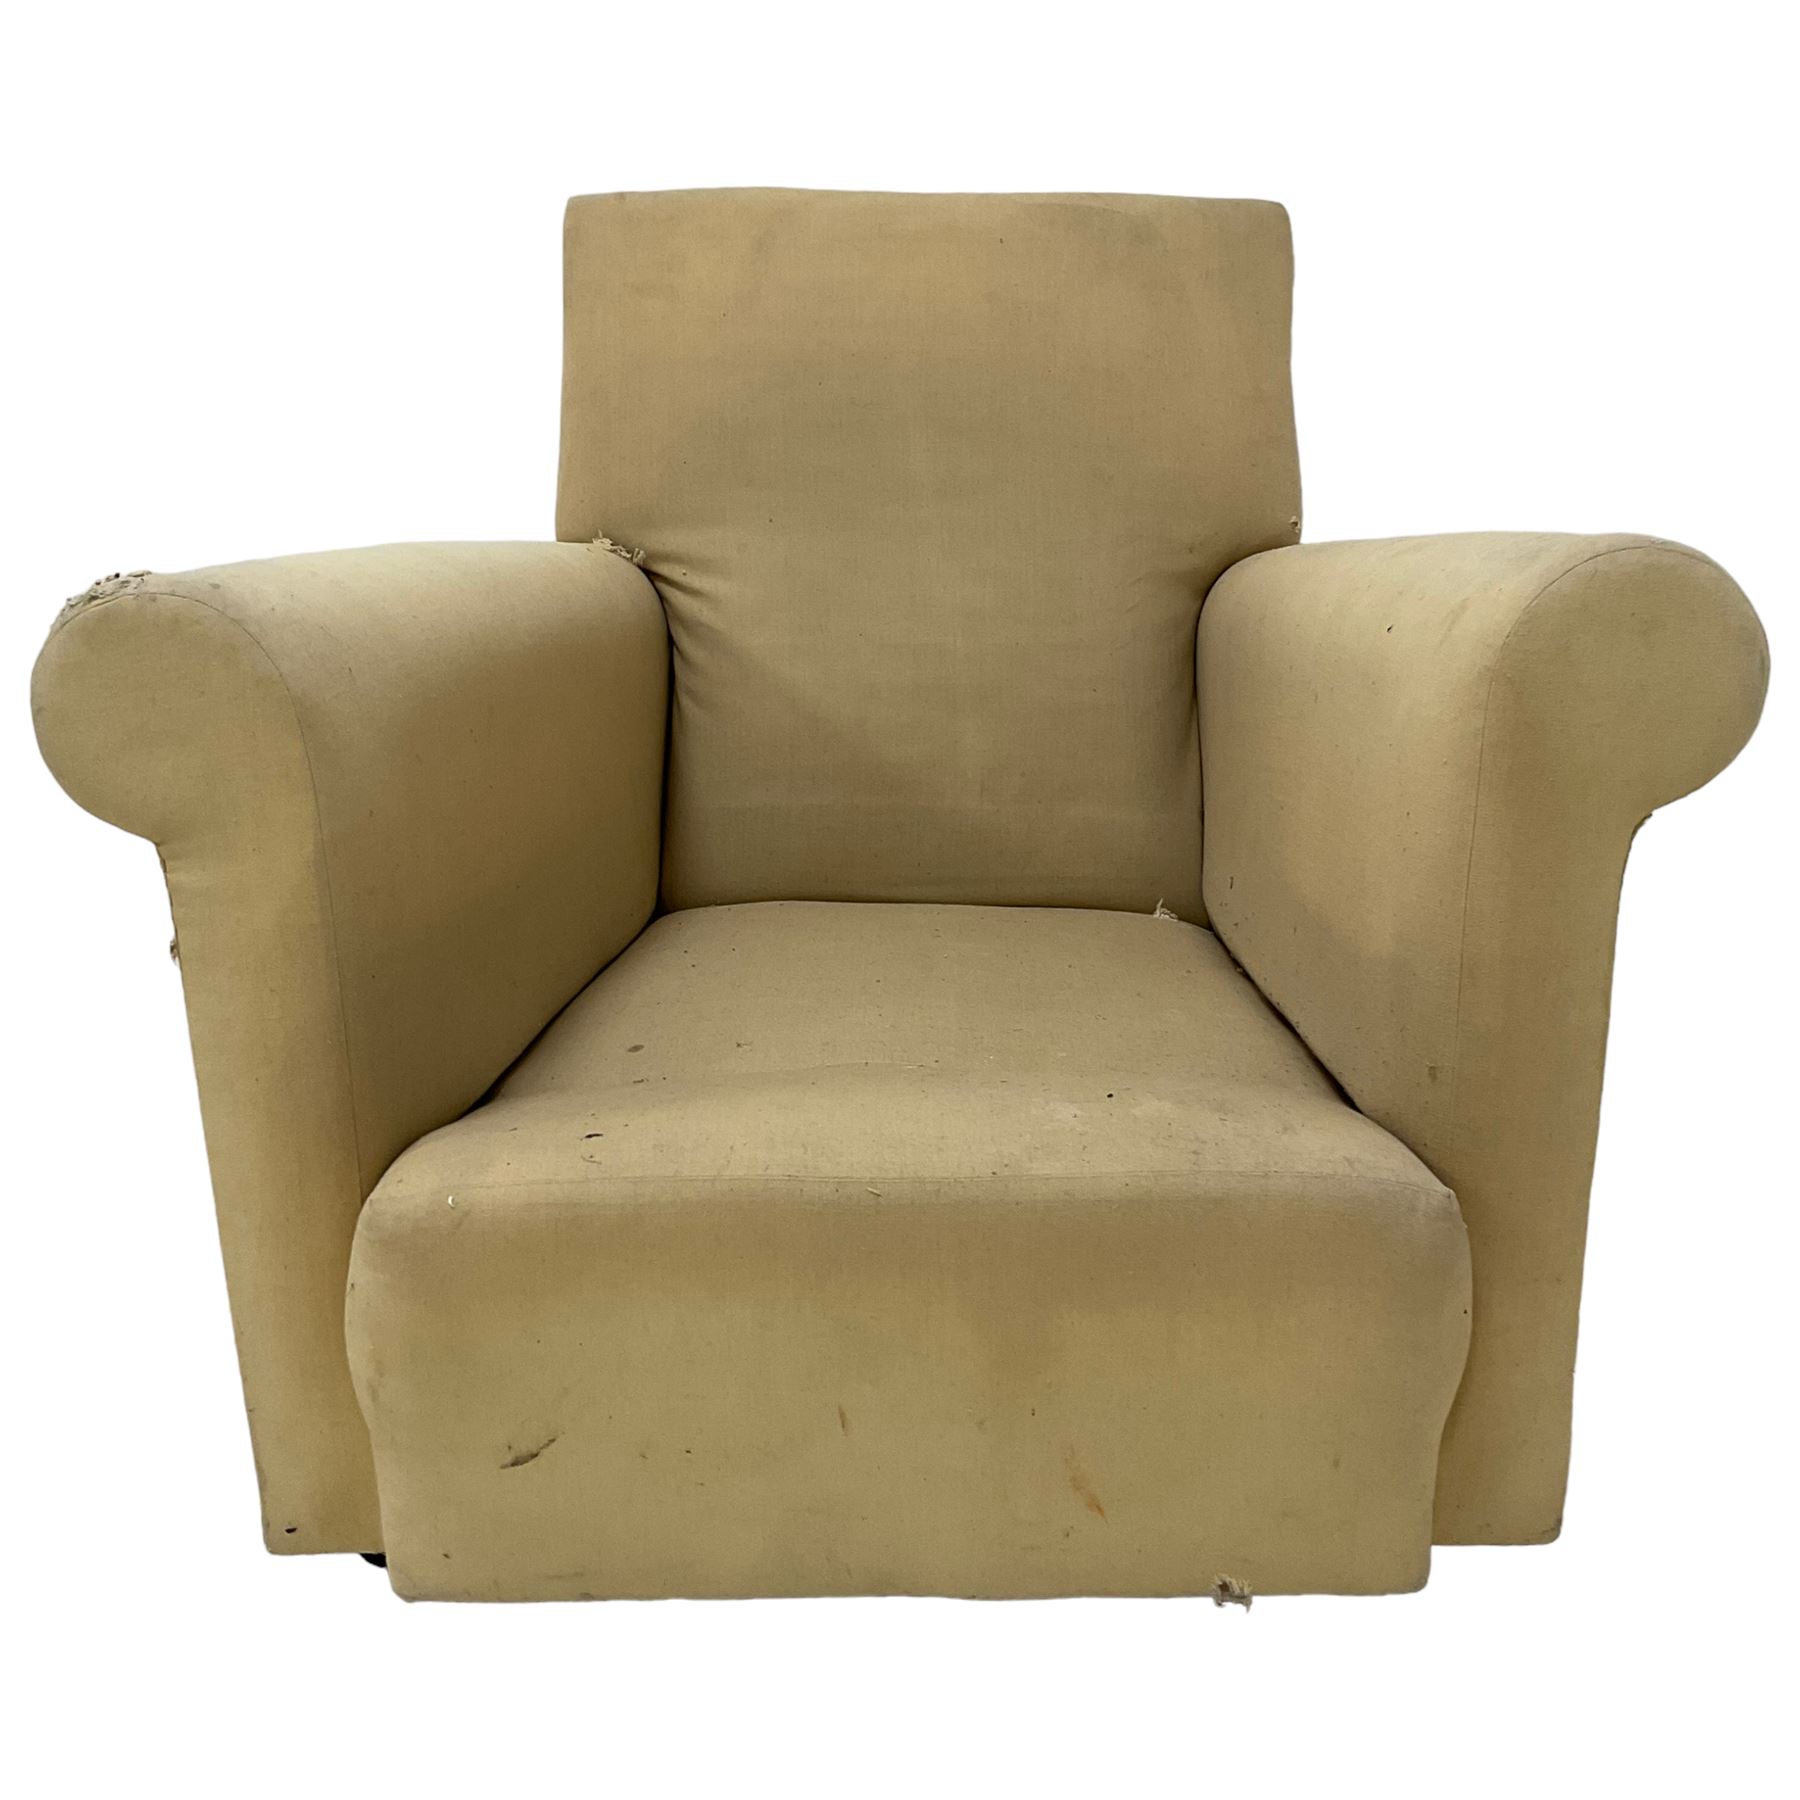 Late 19th to early 20th century armchair